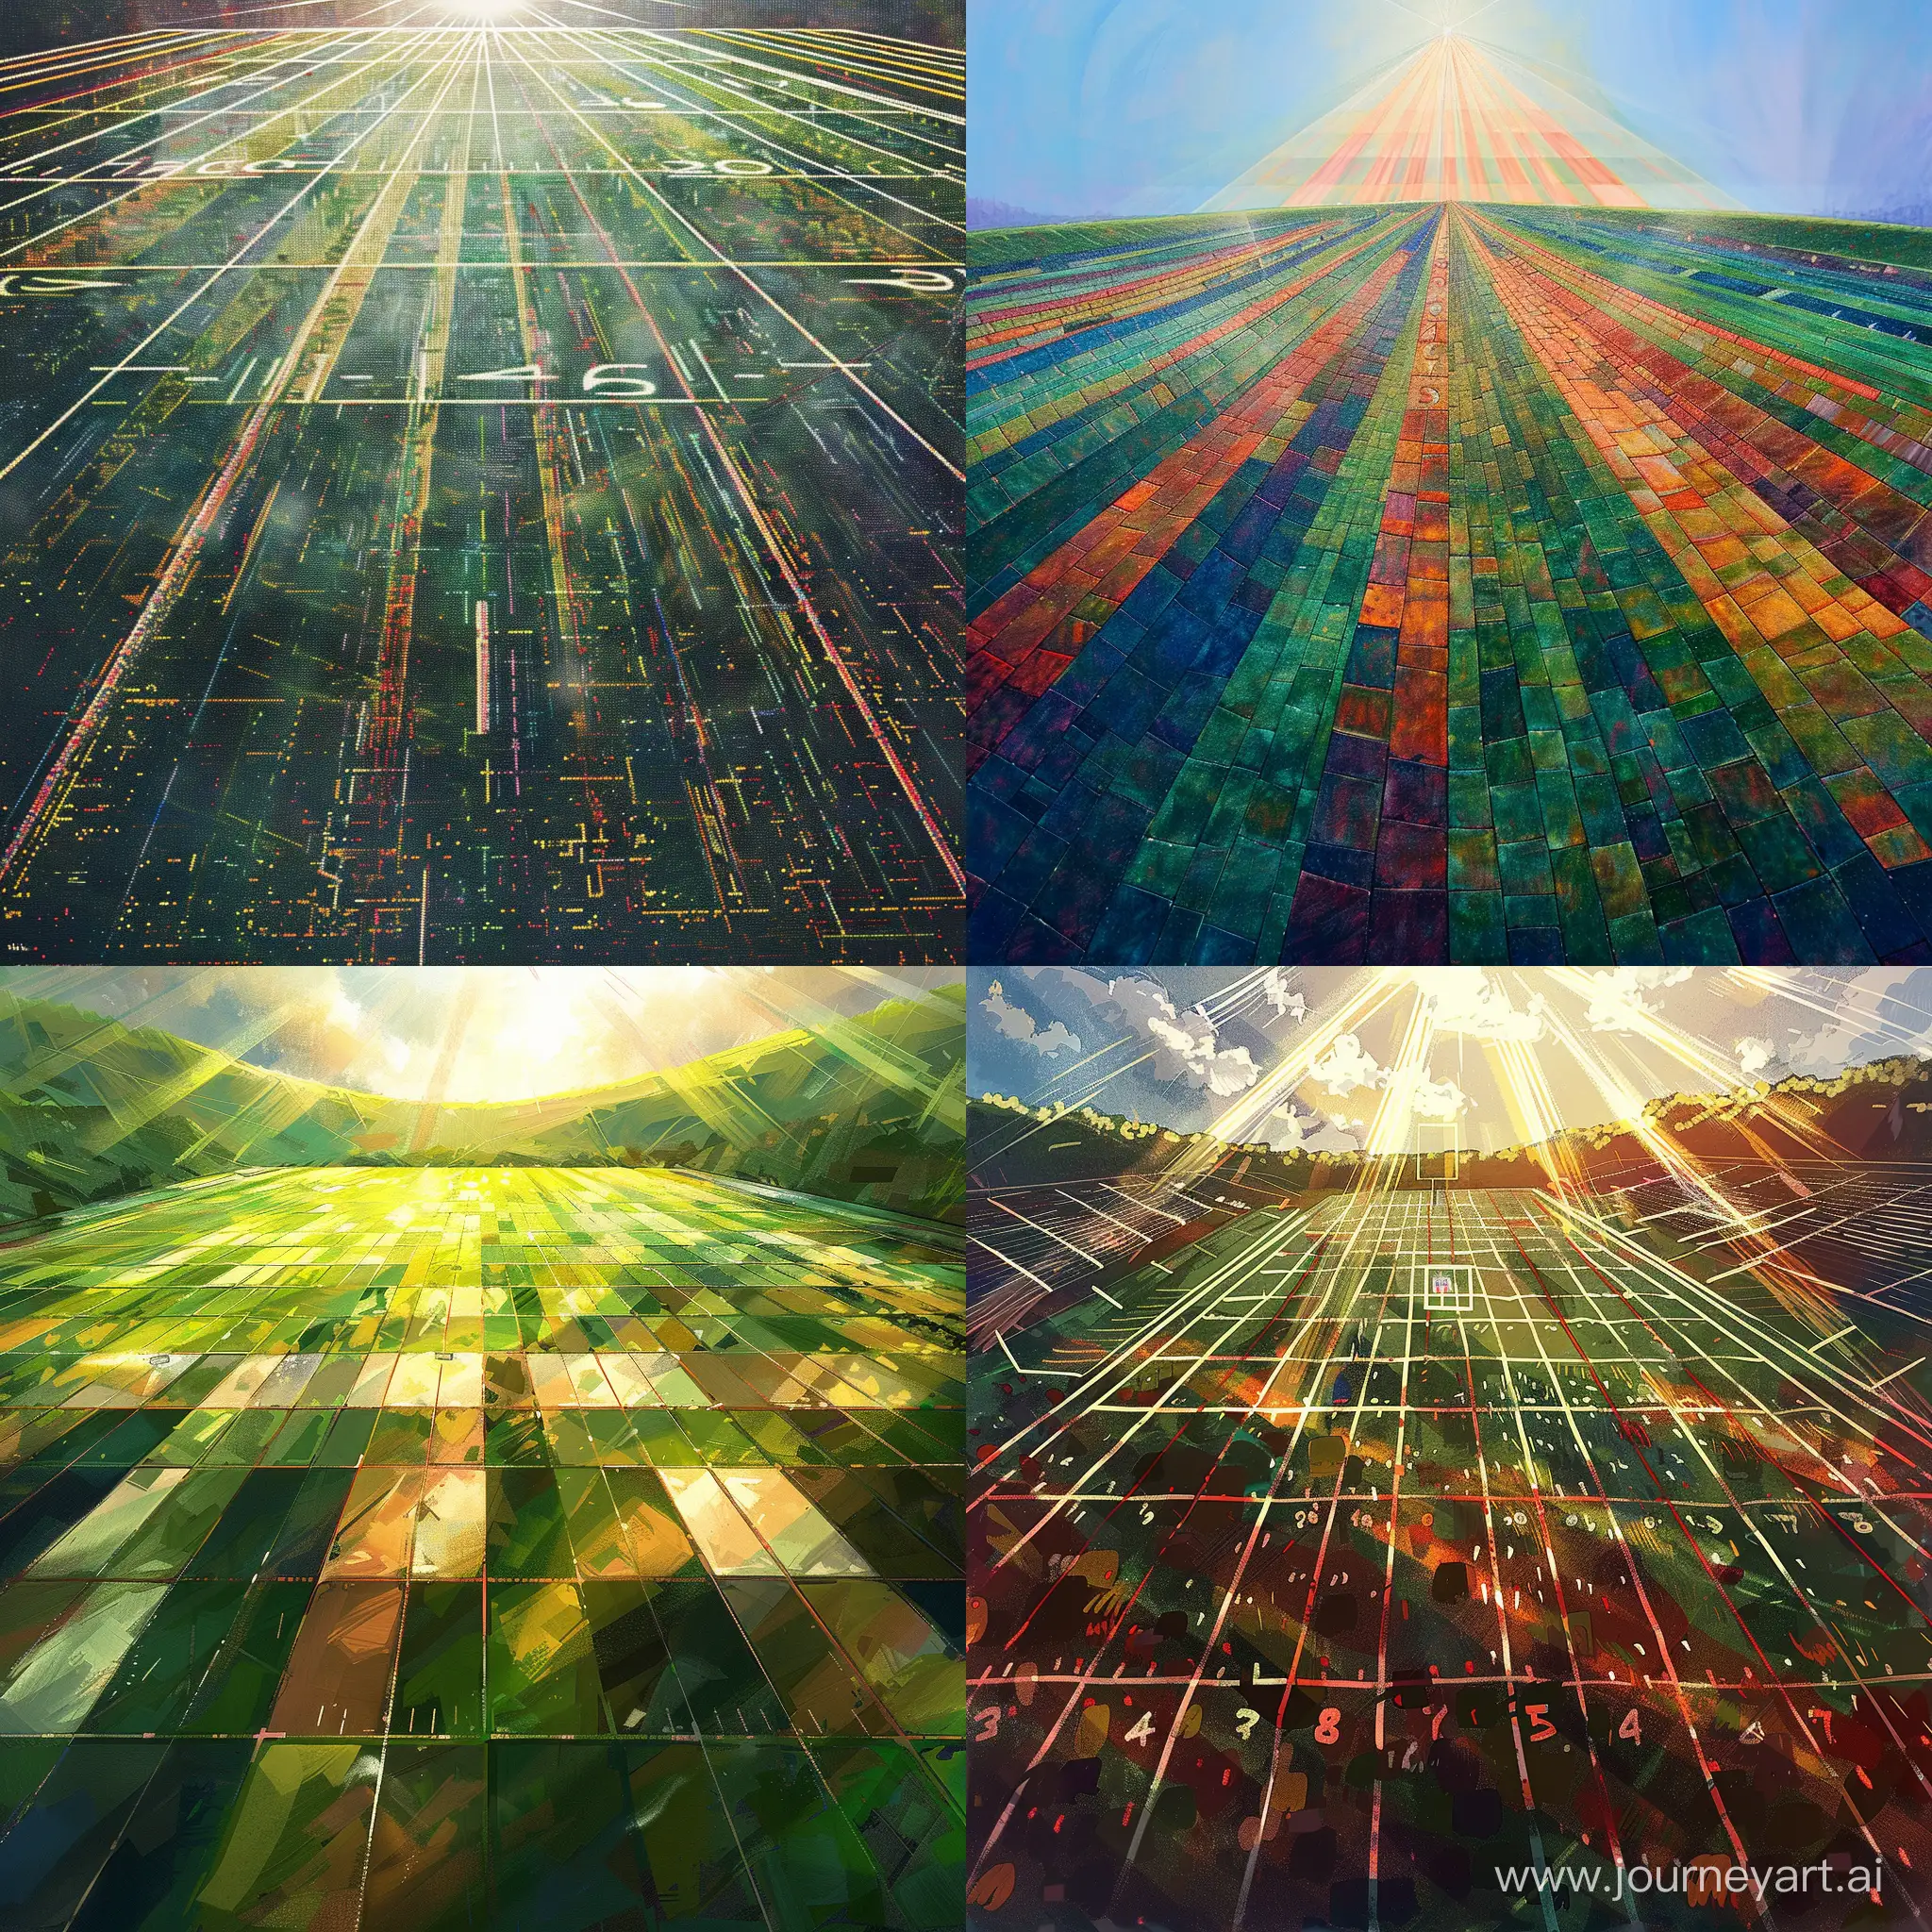 With tranquility and deep emotions, create a Mosaic painting of a two-dimensional cartoon football field. Look at this field from various perspectives and draw the details with cohesive score lines and lively colors, immortalizing the sense of movement and sports in the air of this painting. The sunlight shining from the top of the image brings all colors to life, infusing these Mosaic artworks with positive energy."